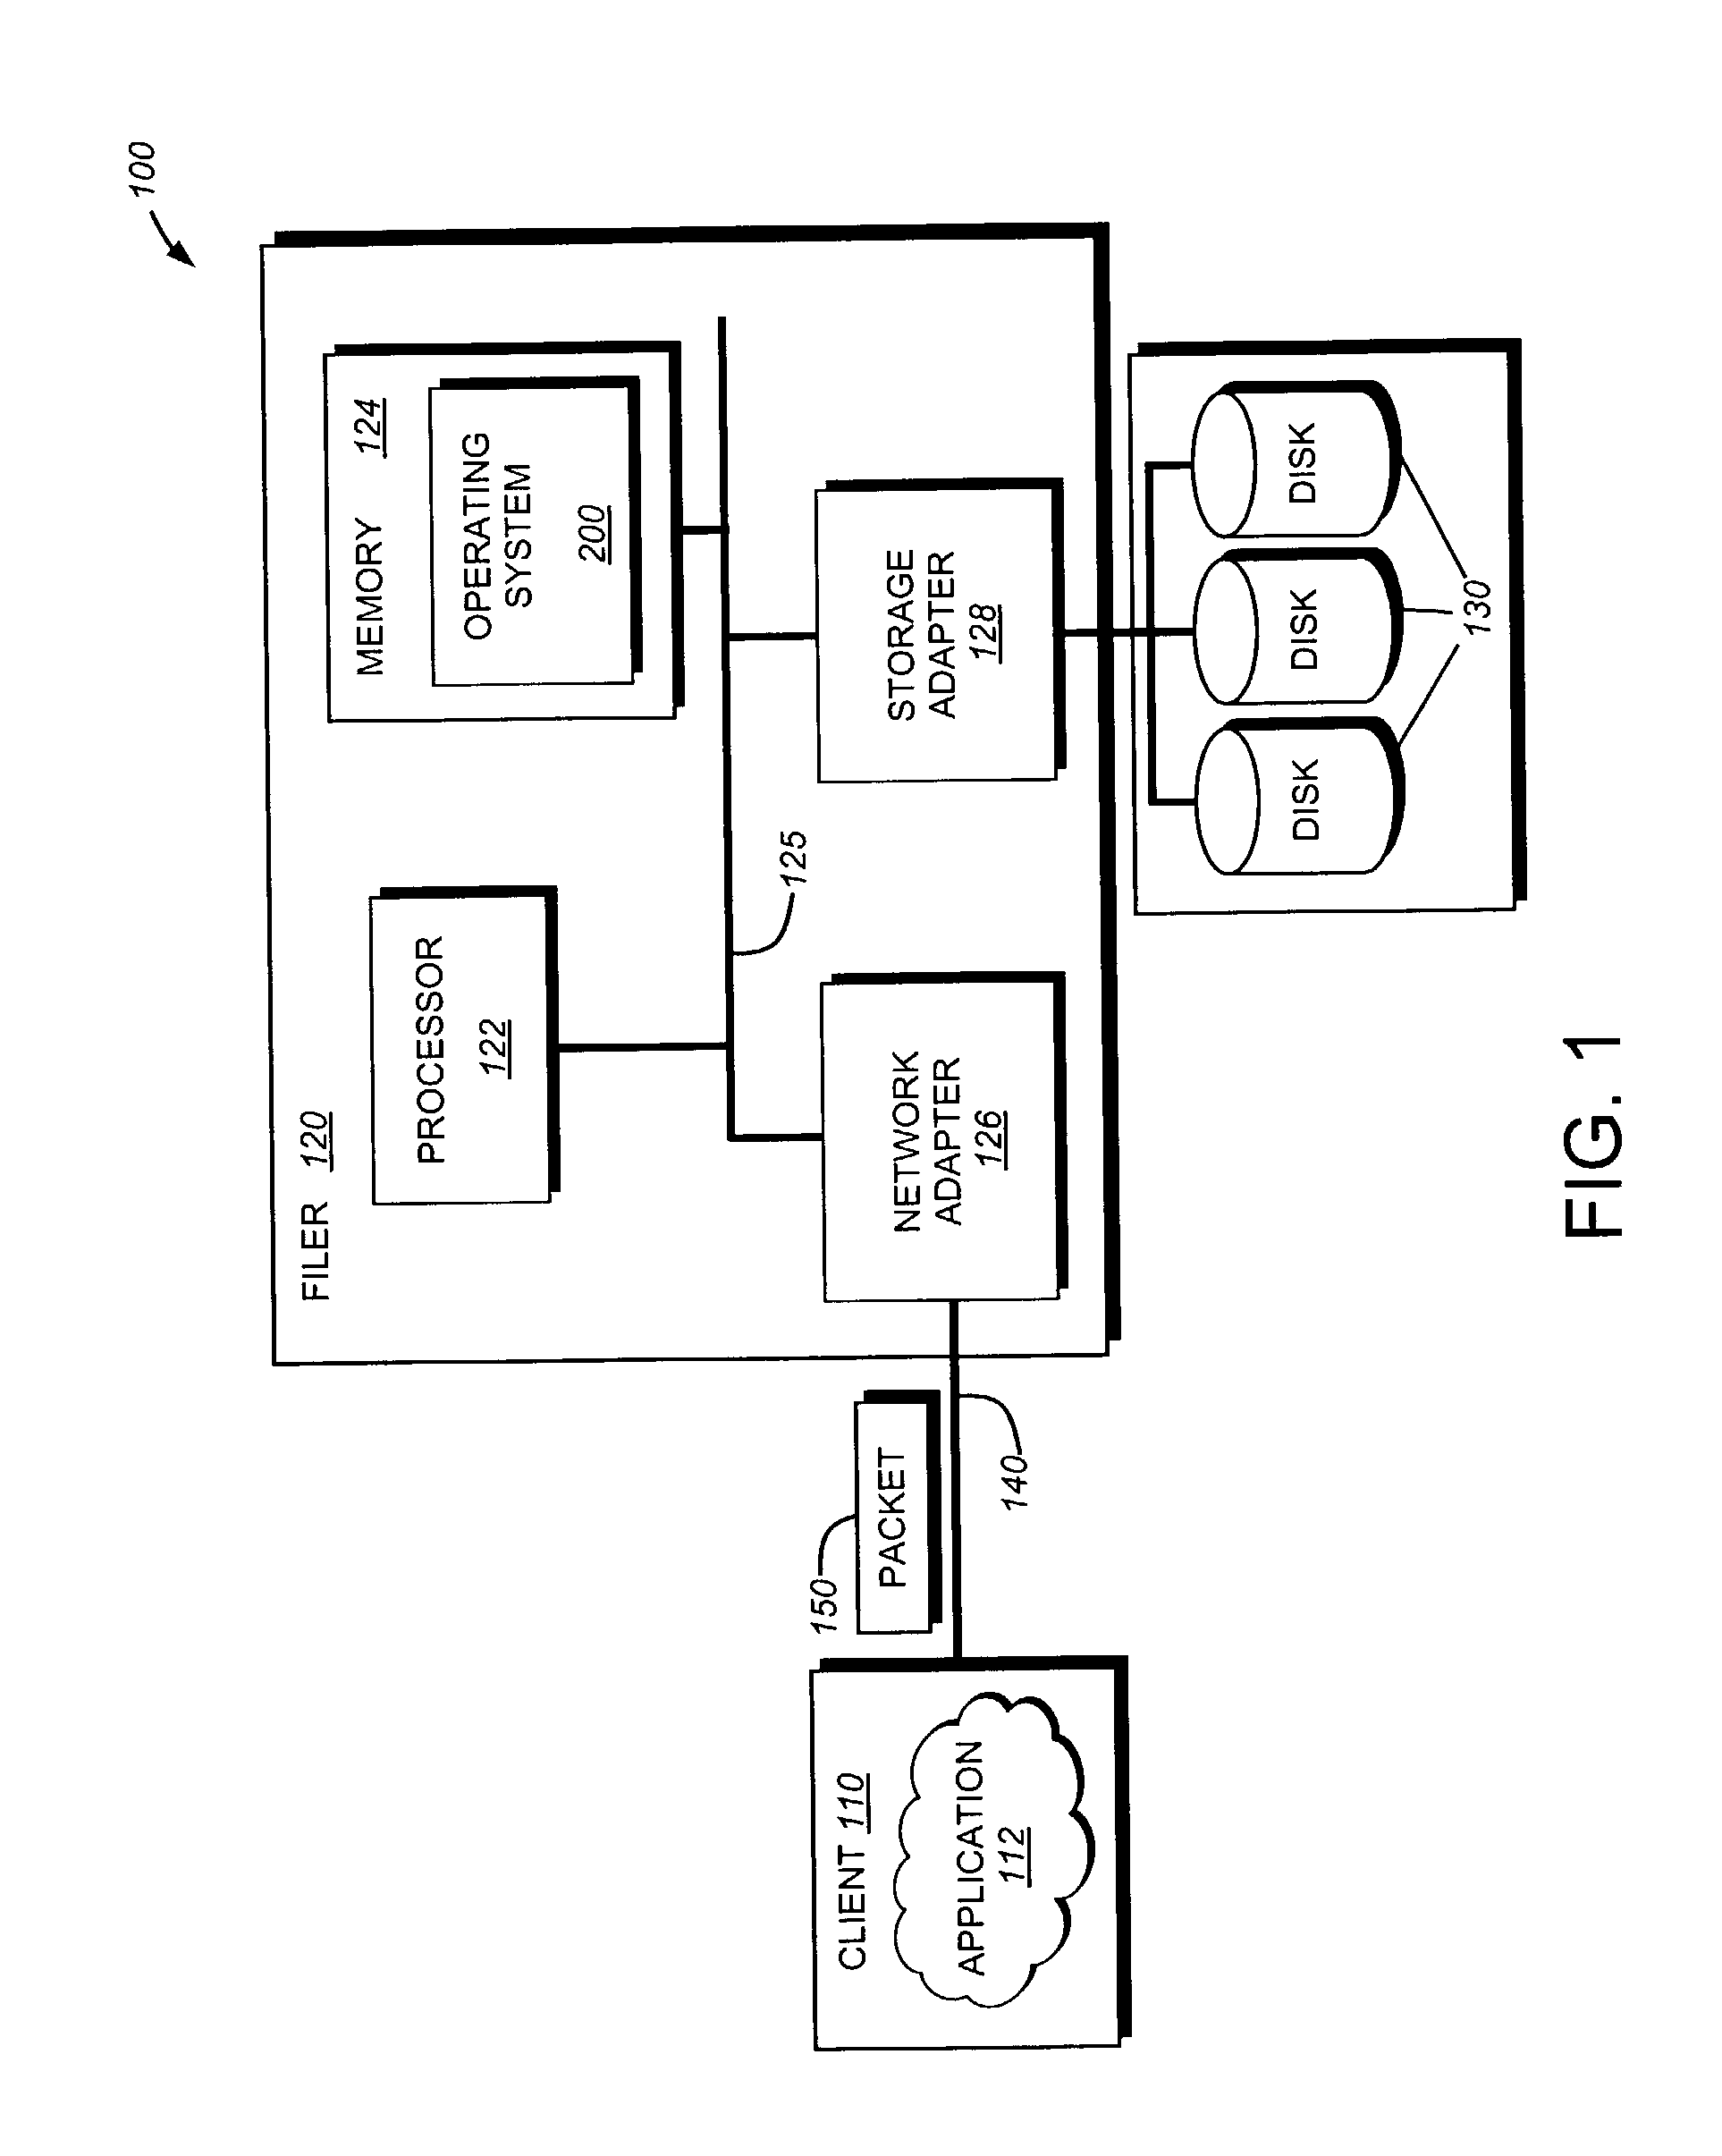 System and method for tracking modified files in a file system